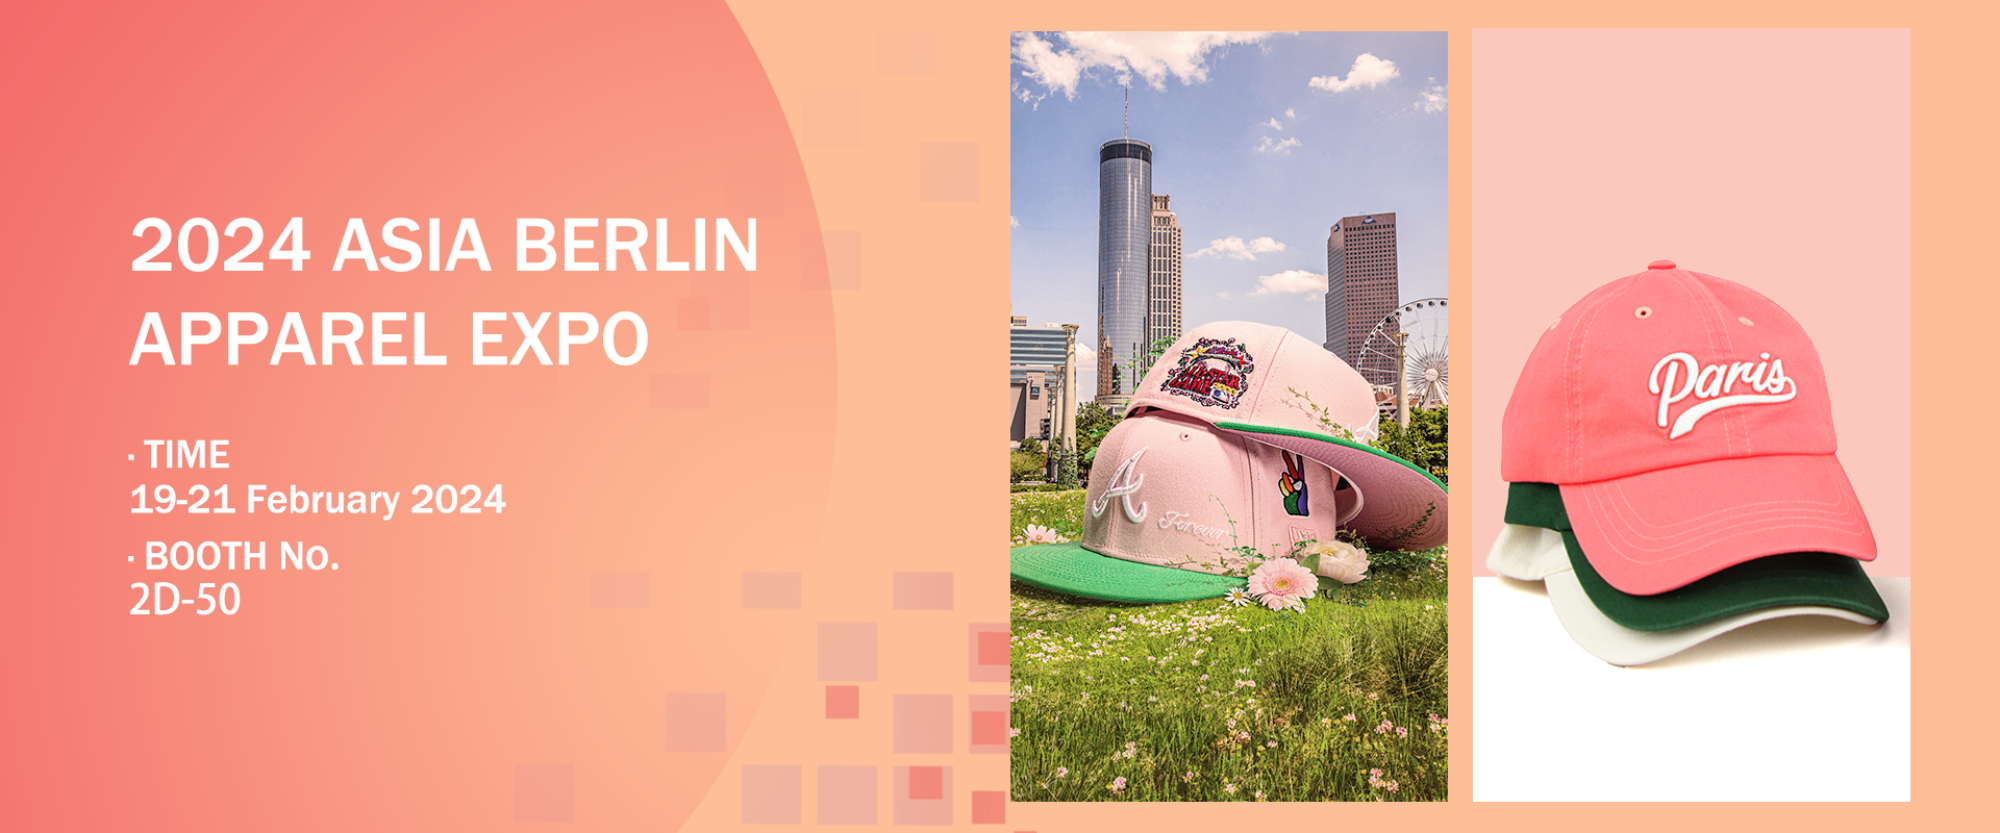 Berlin Fashion Fair Asia, from February 19 to February 21, 2024, came to a successful conclusion